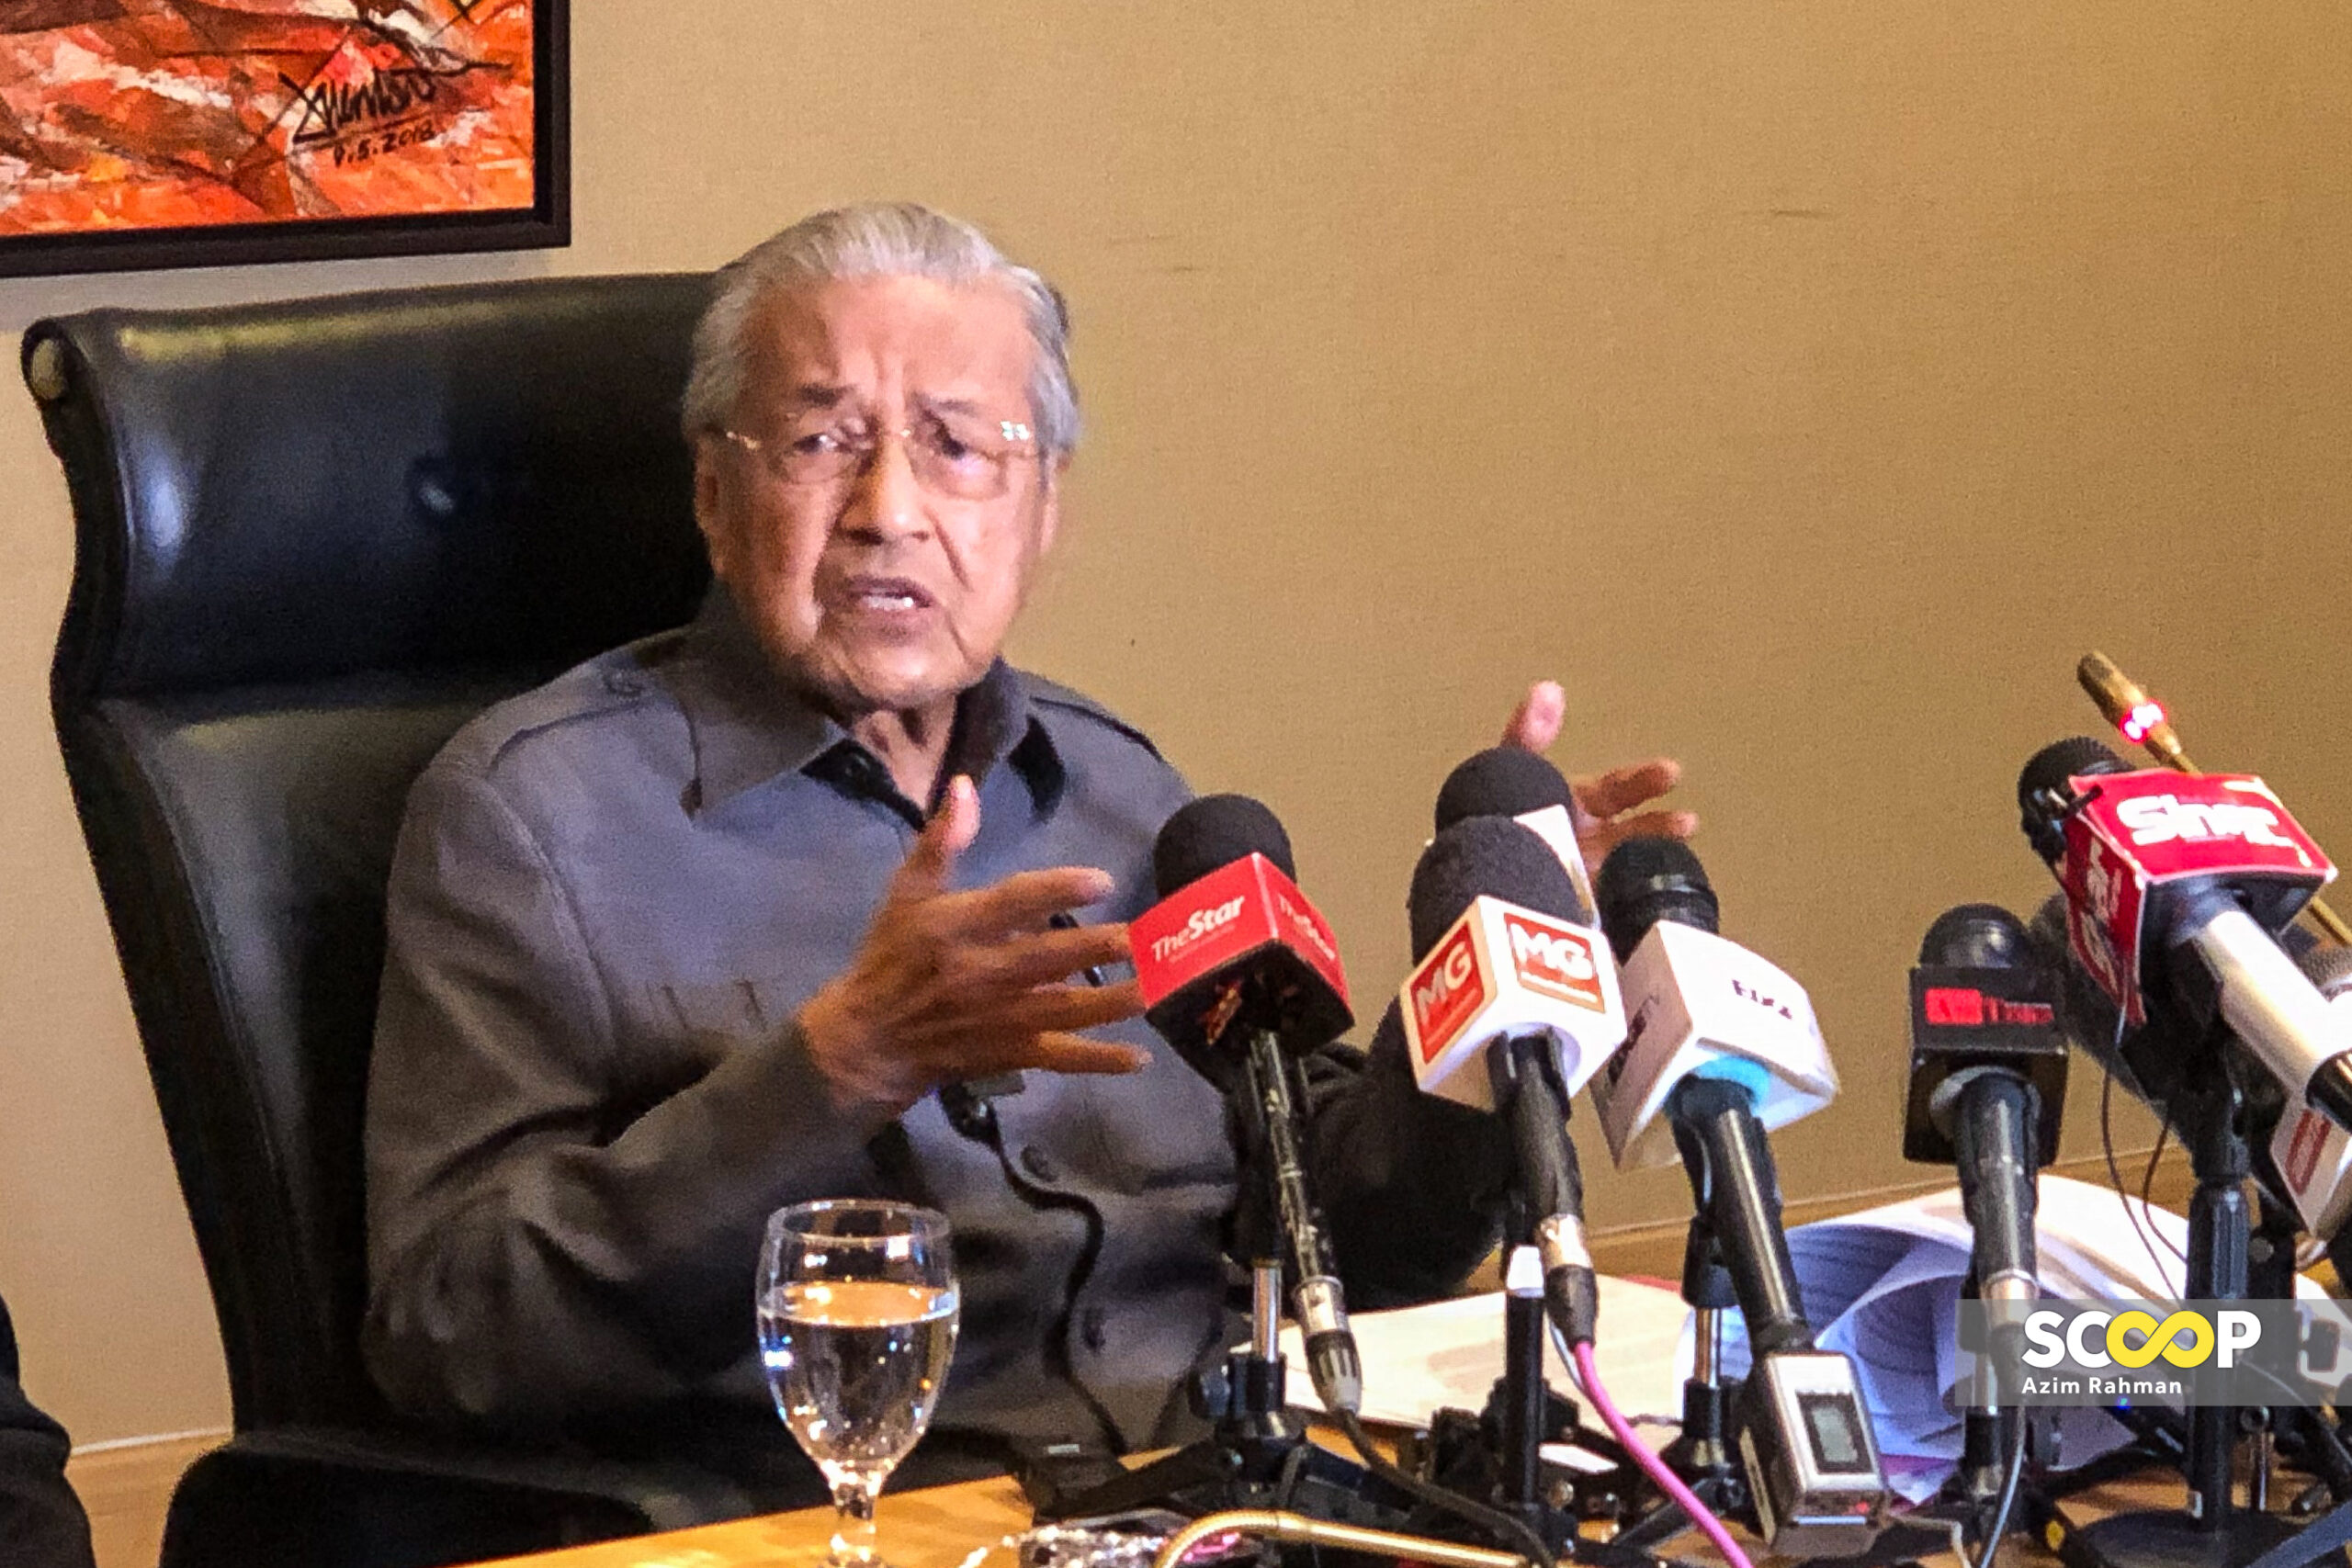 [UPDATED] It’s not challenging to investigate me, I’m just a Tun: Dr Mahathir